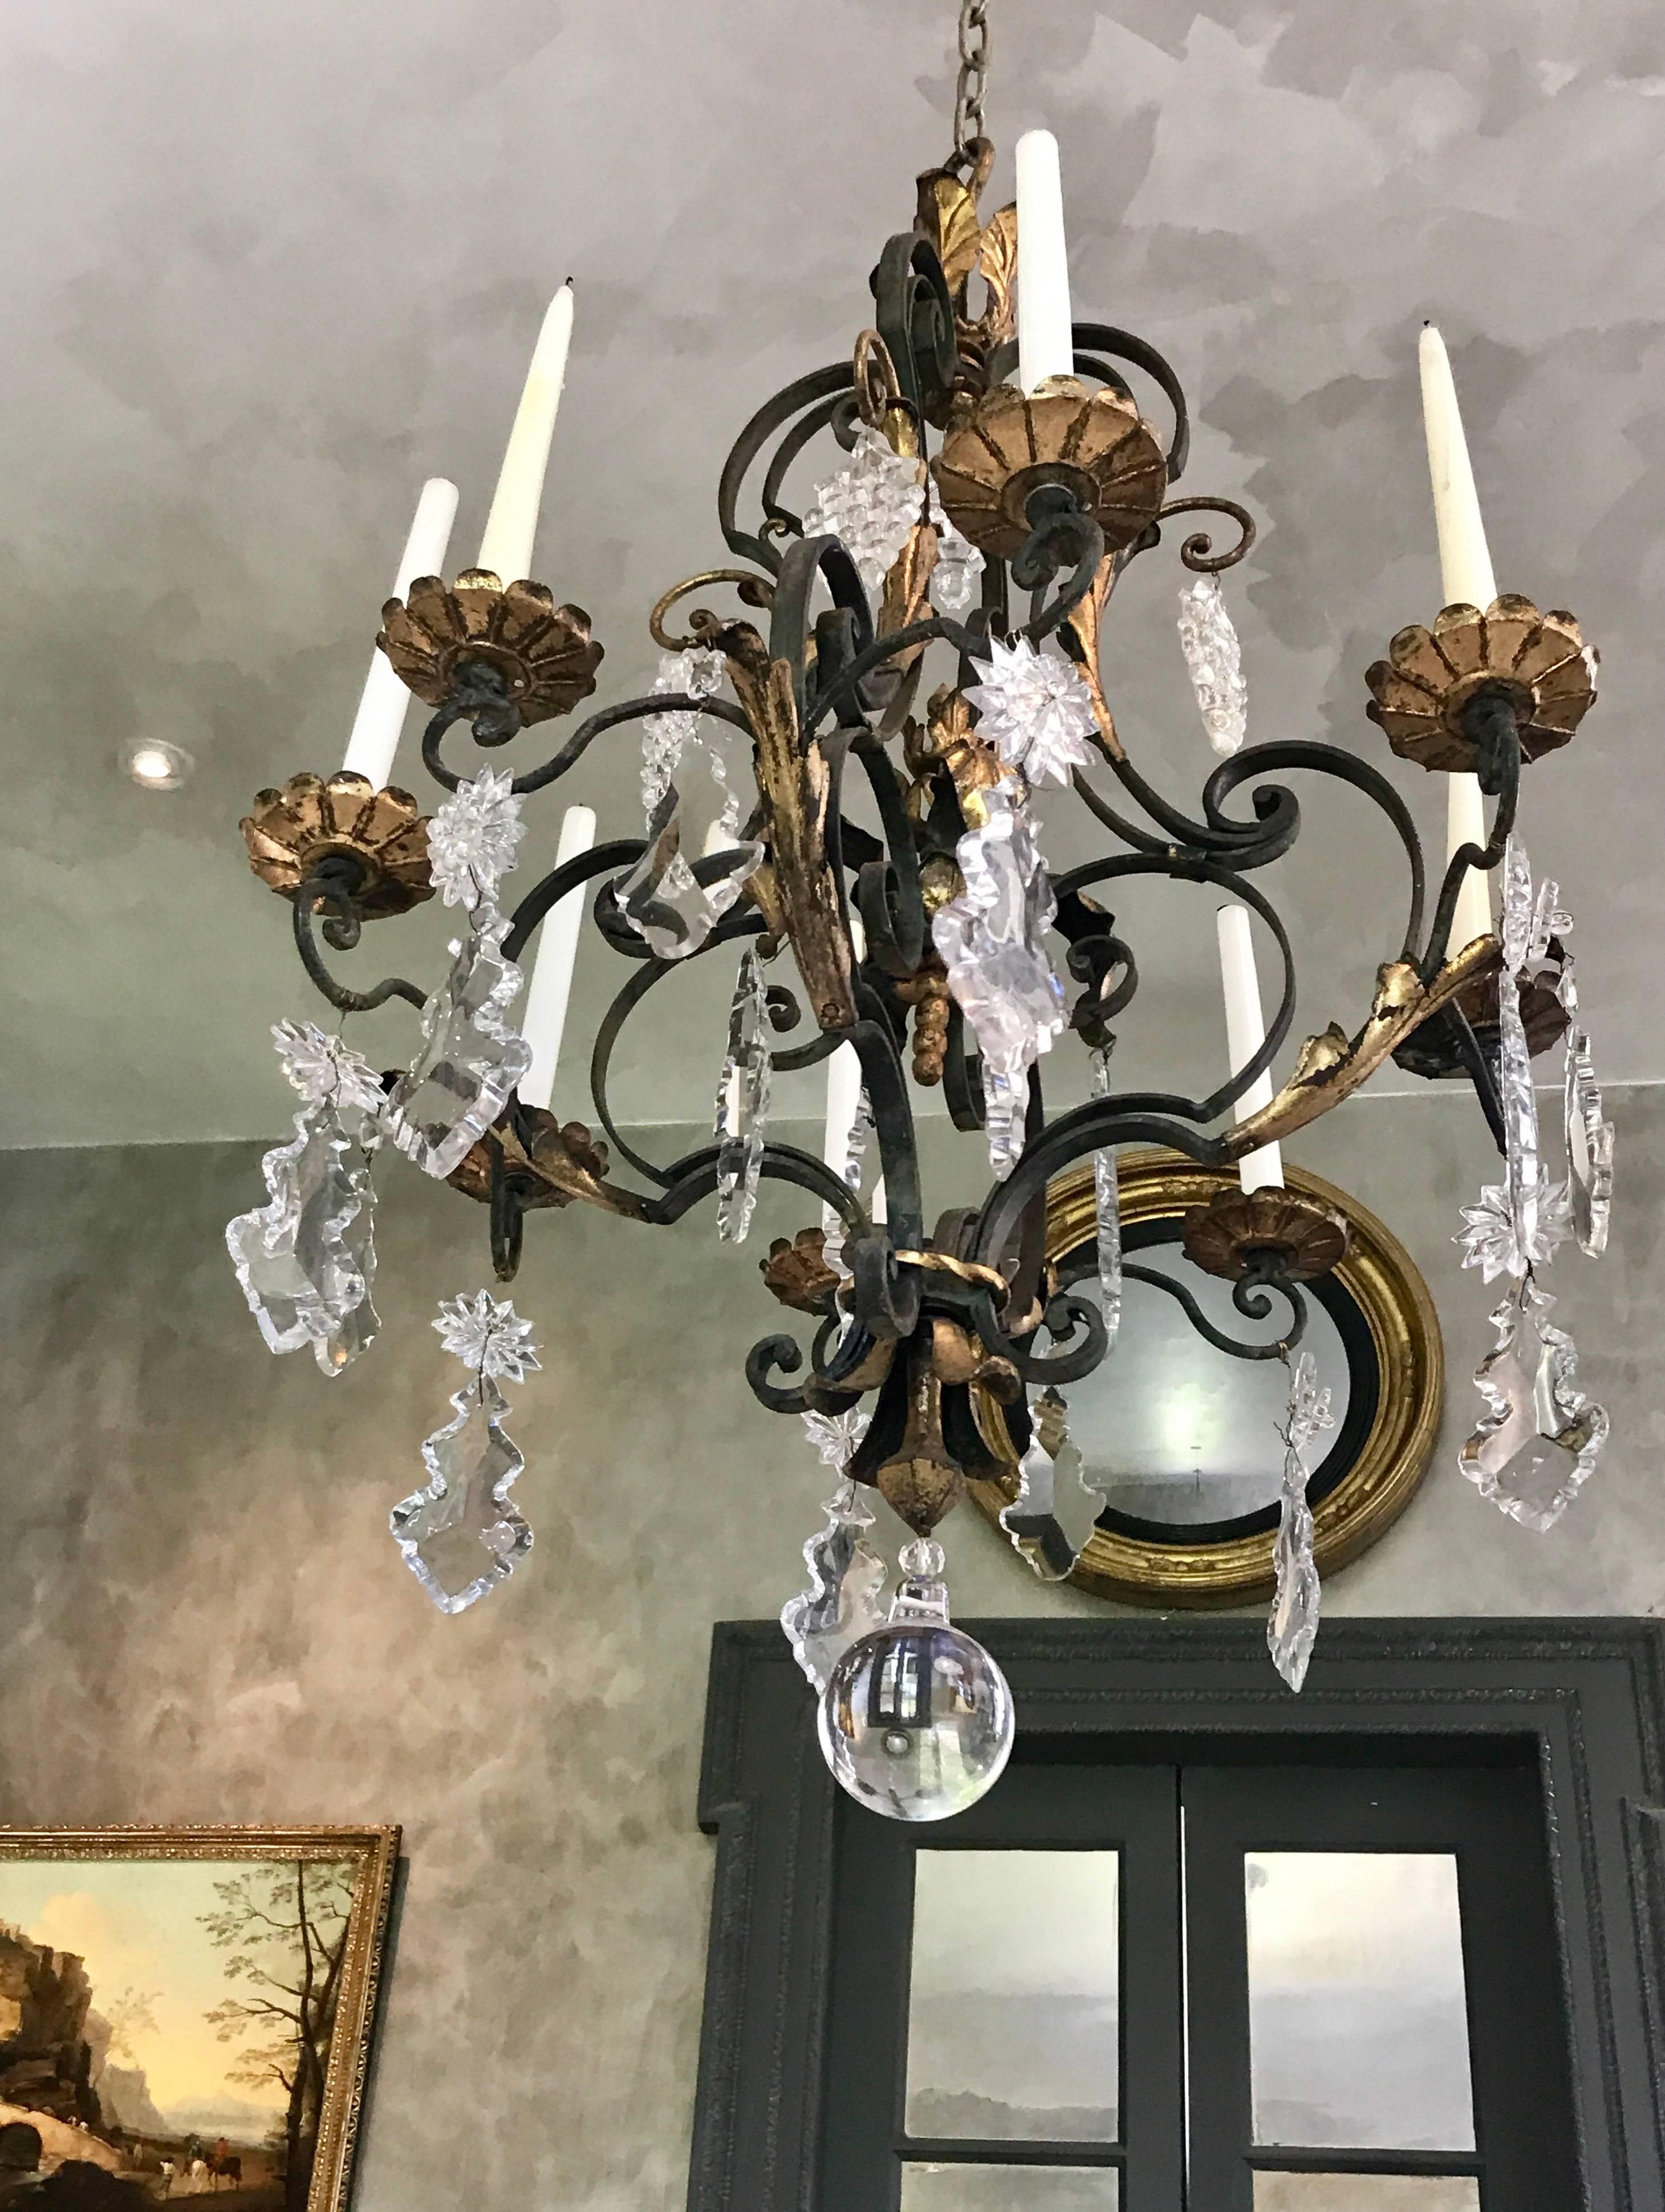 This masterfully crafted Louis XV style eight-arm wrought iron chandelier is a pleasure to look at. 
The lead crystal prisms reflect the warm candle light. 24-karat gold highlights on foliate scrolls and the bobeches give the chandelier